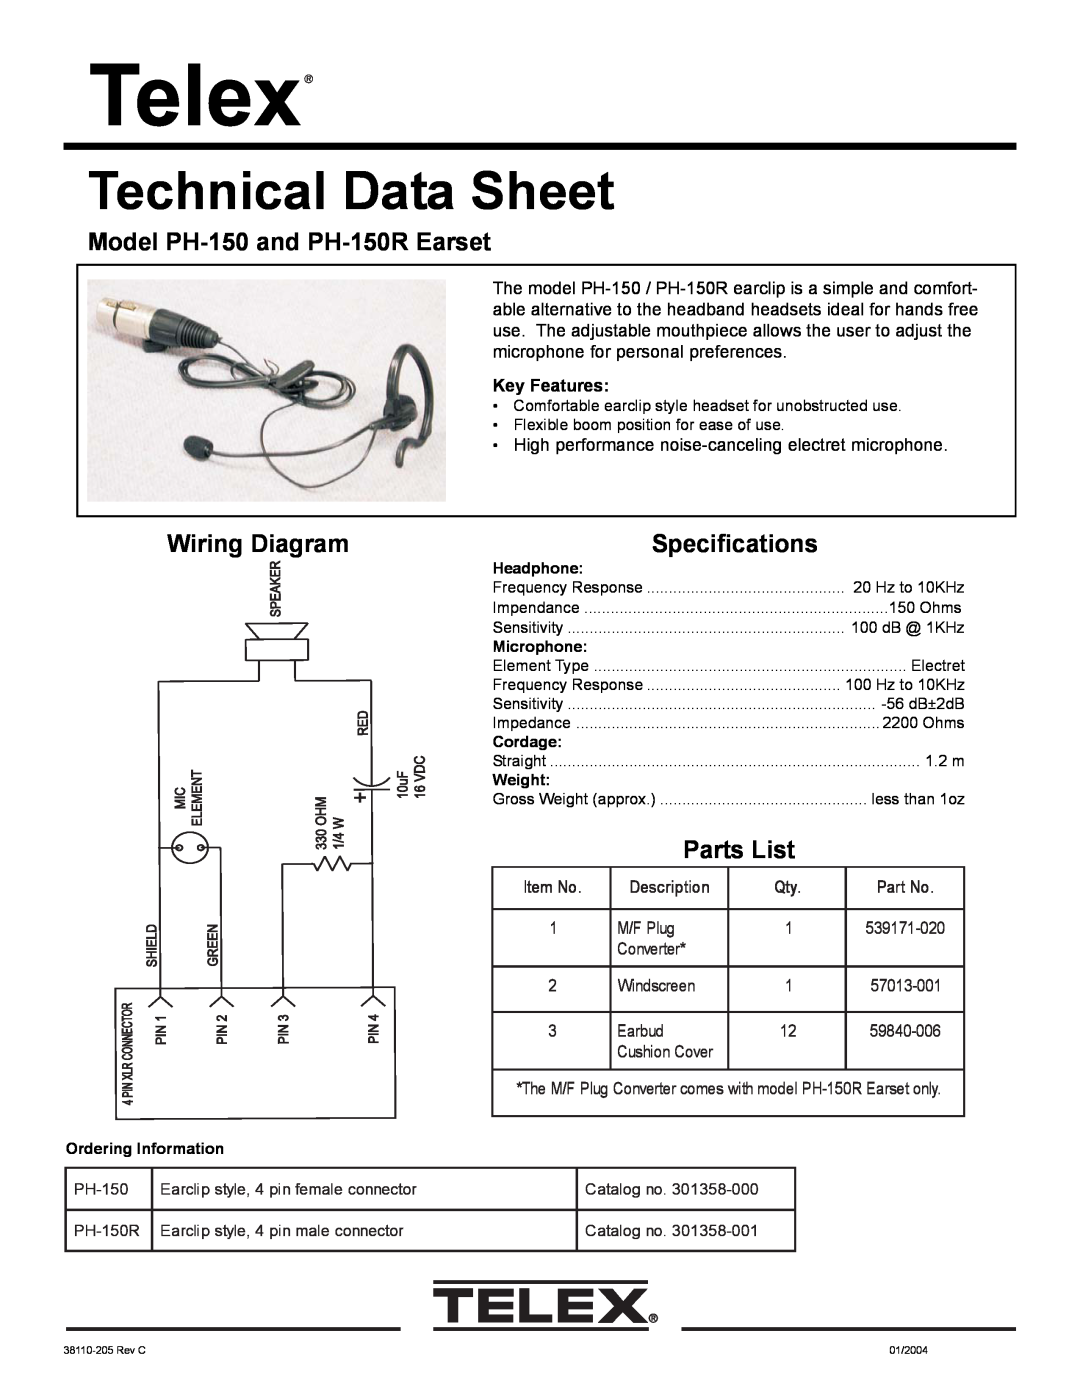 Telex specifications Technical Data Sheet, Model PH-150 and PH-150R Earset, Wiring Diagram, Specifications, Description 